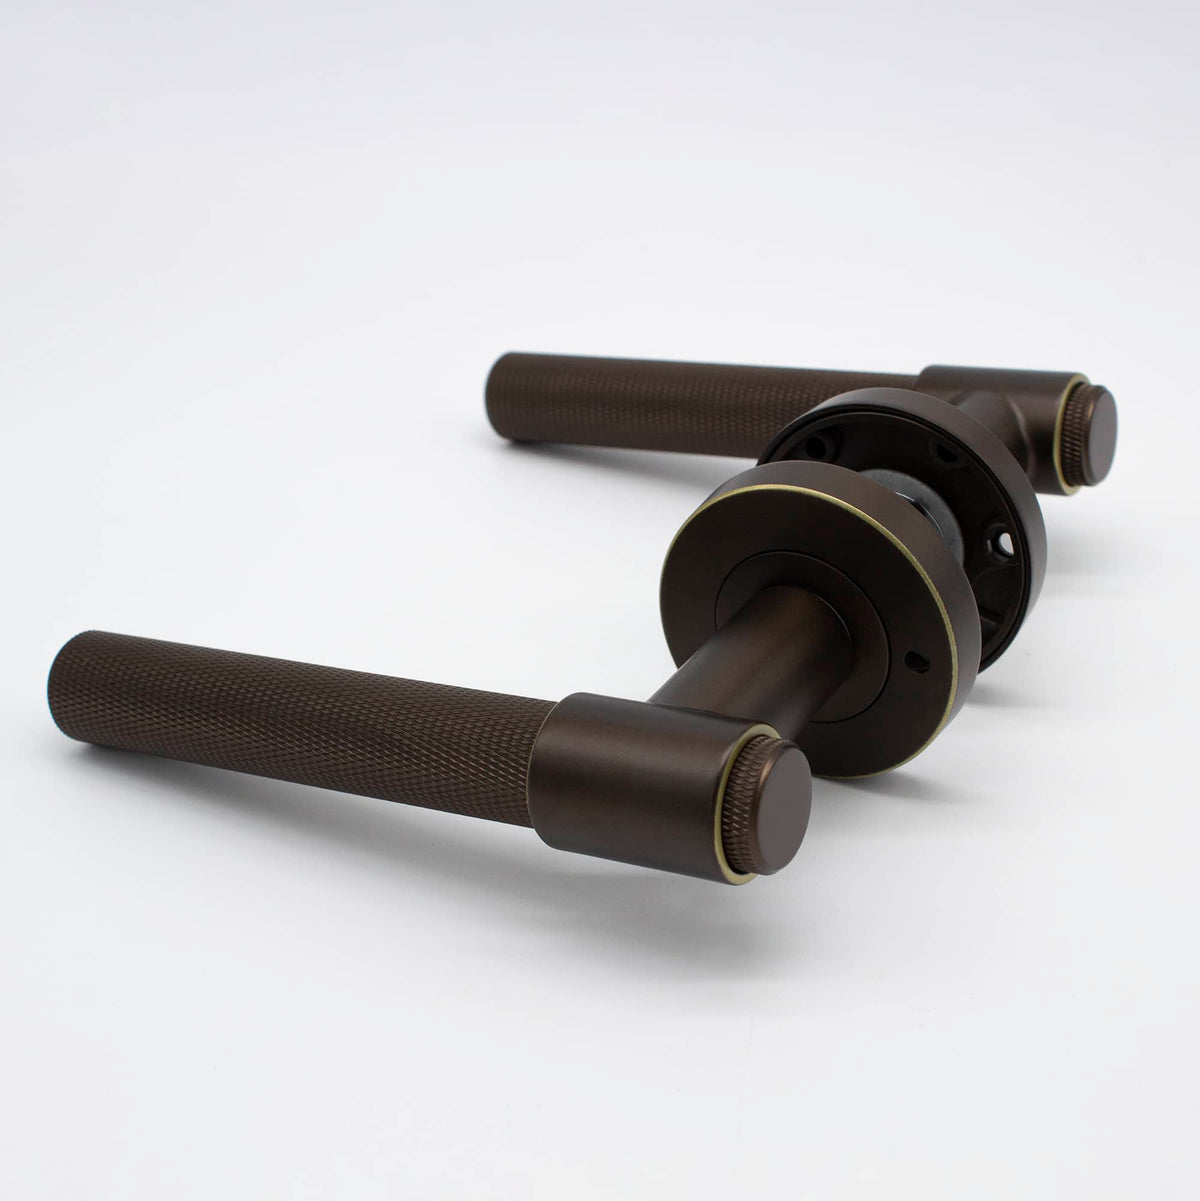 Aged Brass Knurled Privacy Door Handle - Rosedale